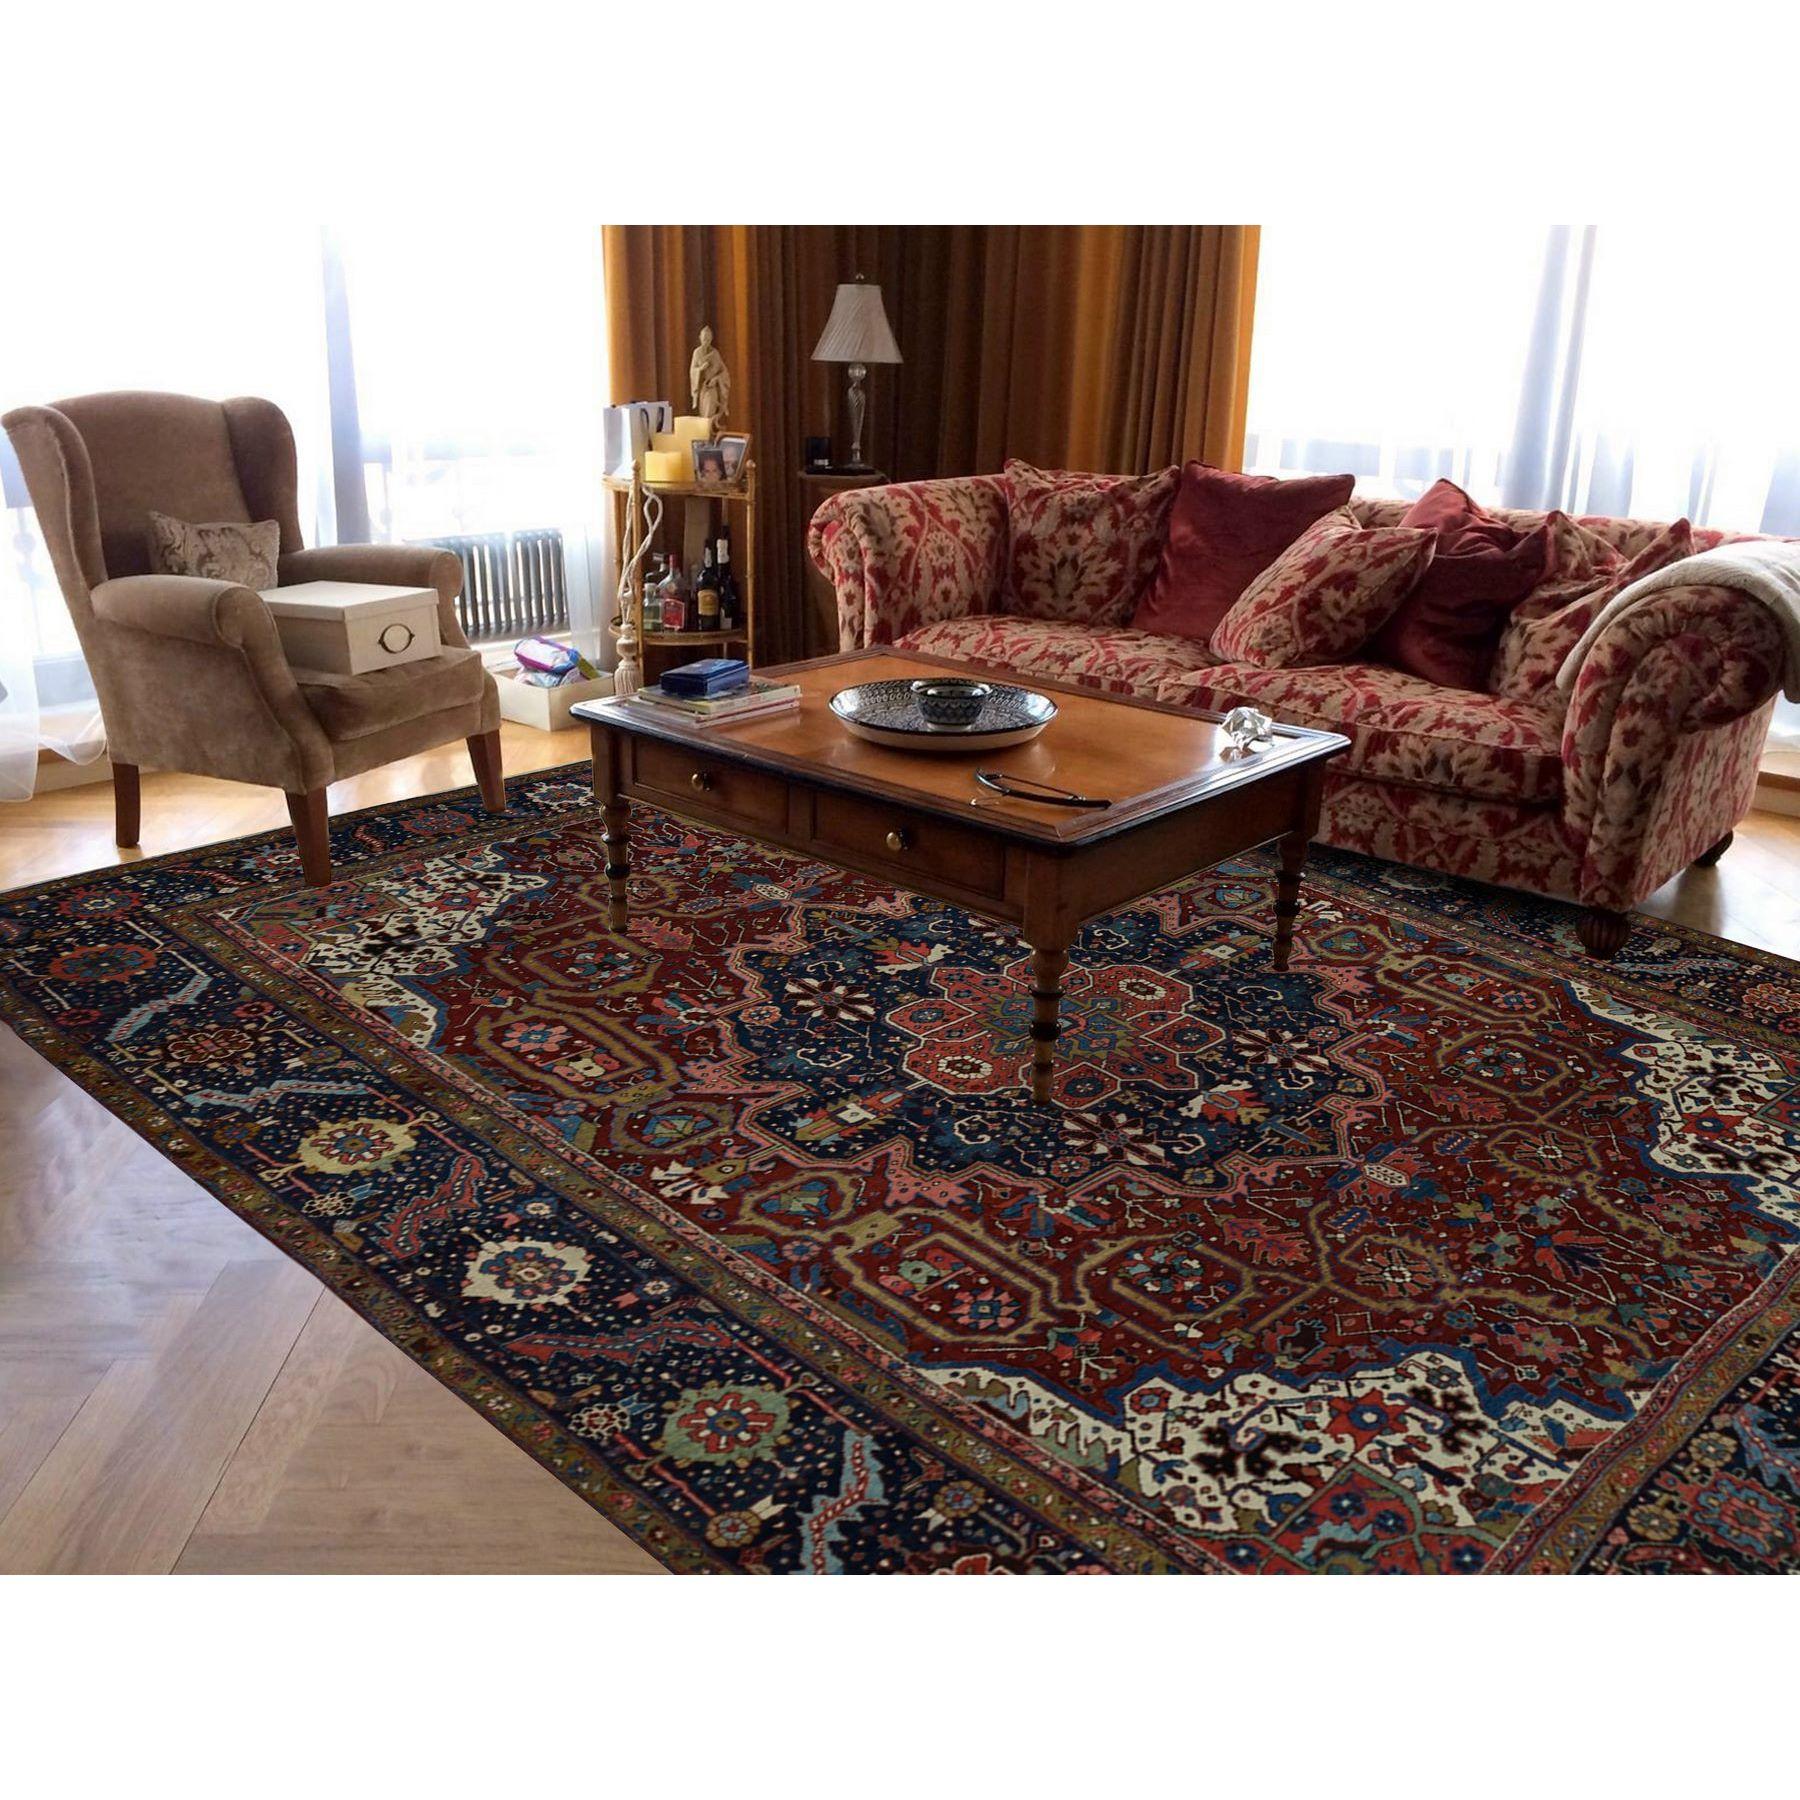 This fabulous Hand-Knotted carpet has been created and designed for extra strength and durability. This rug has been handcrafted for weeks in the traditional method that is used to make
Exact Rug Size in Feet and Inches : 8'3